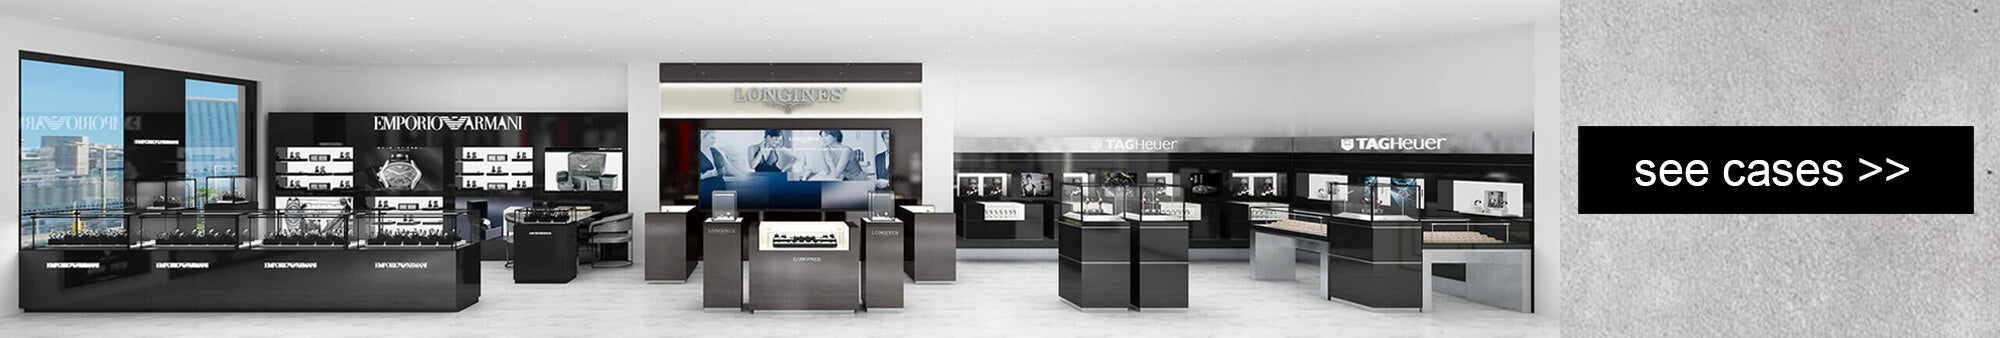 Check the renderings of mall watch kiosks